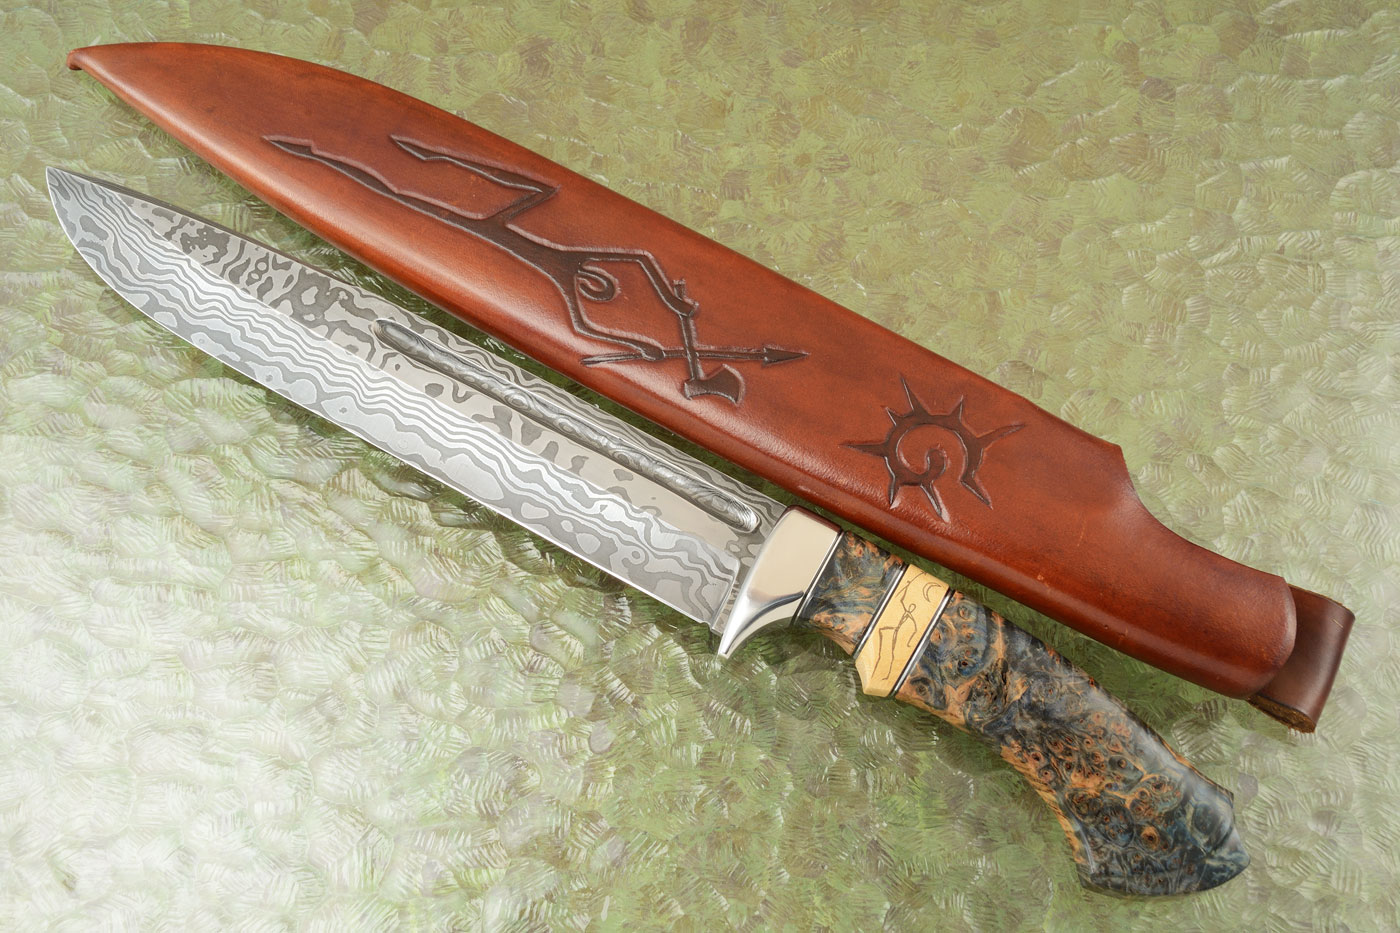 Petroglyph Camp Knife with Sallow Root and Mammoth Ivory